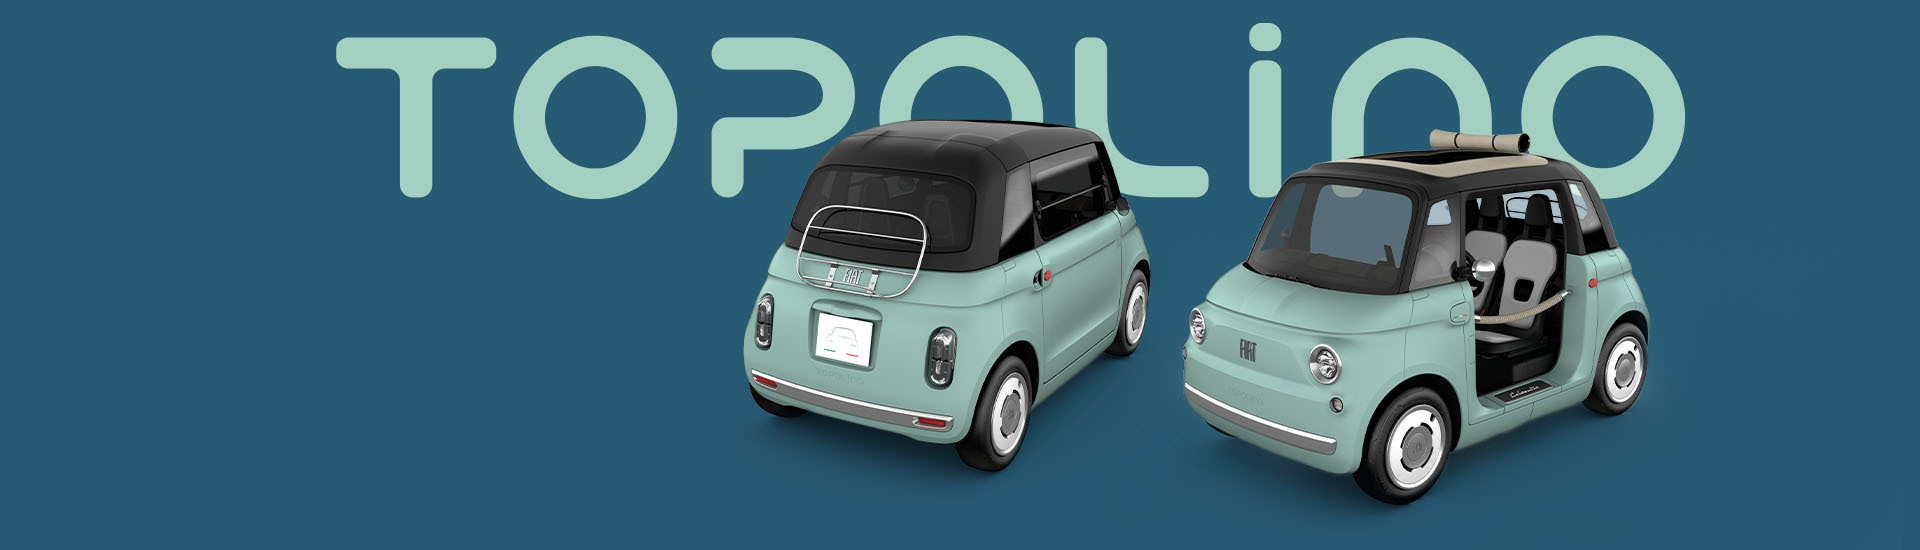 The Fiat Topolino, a cute new quadricycle—not a car!